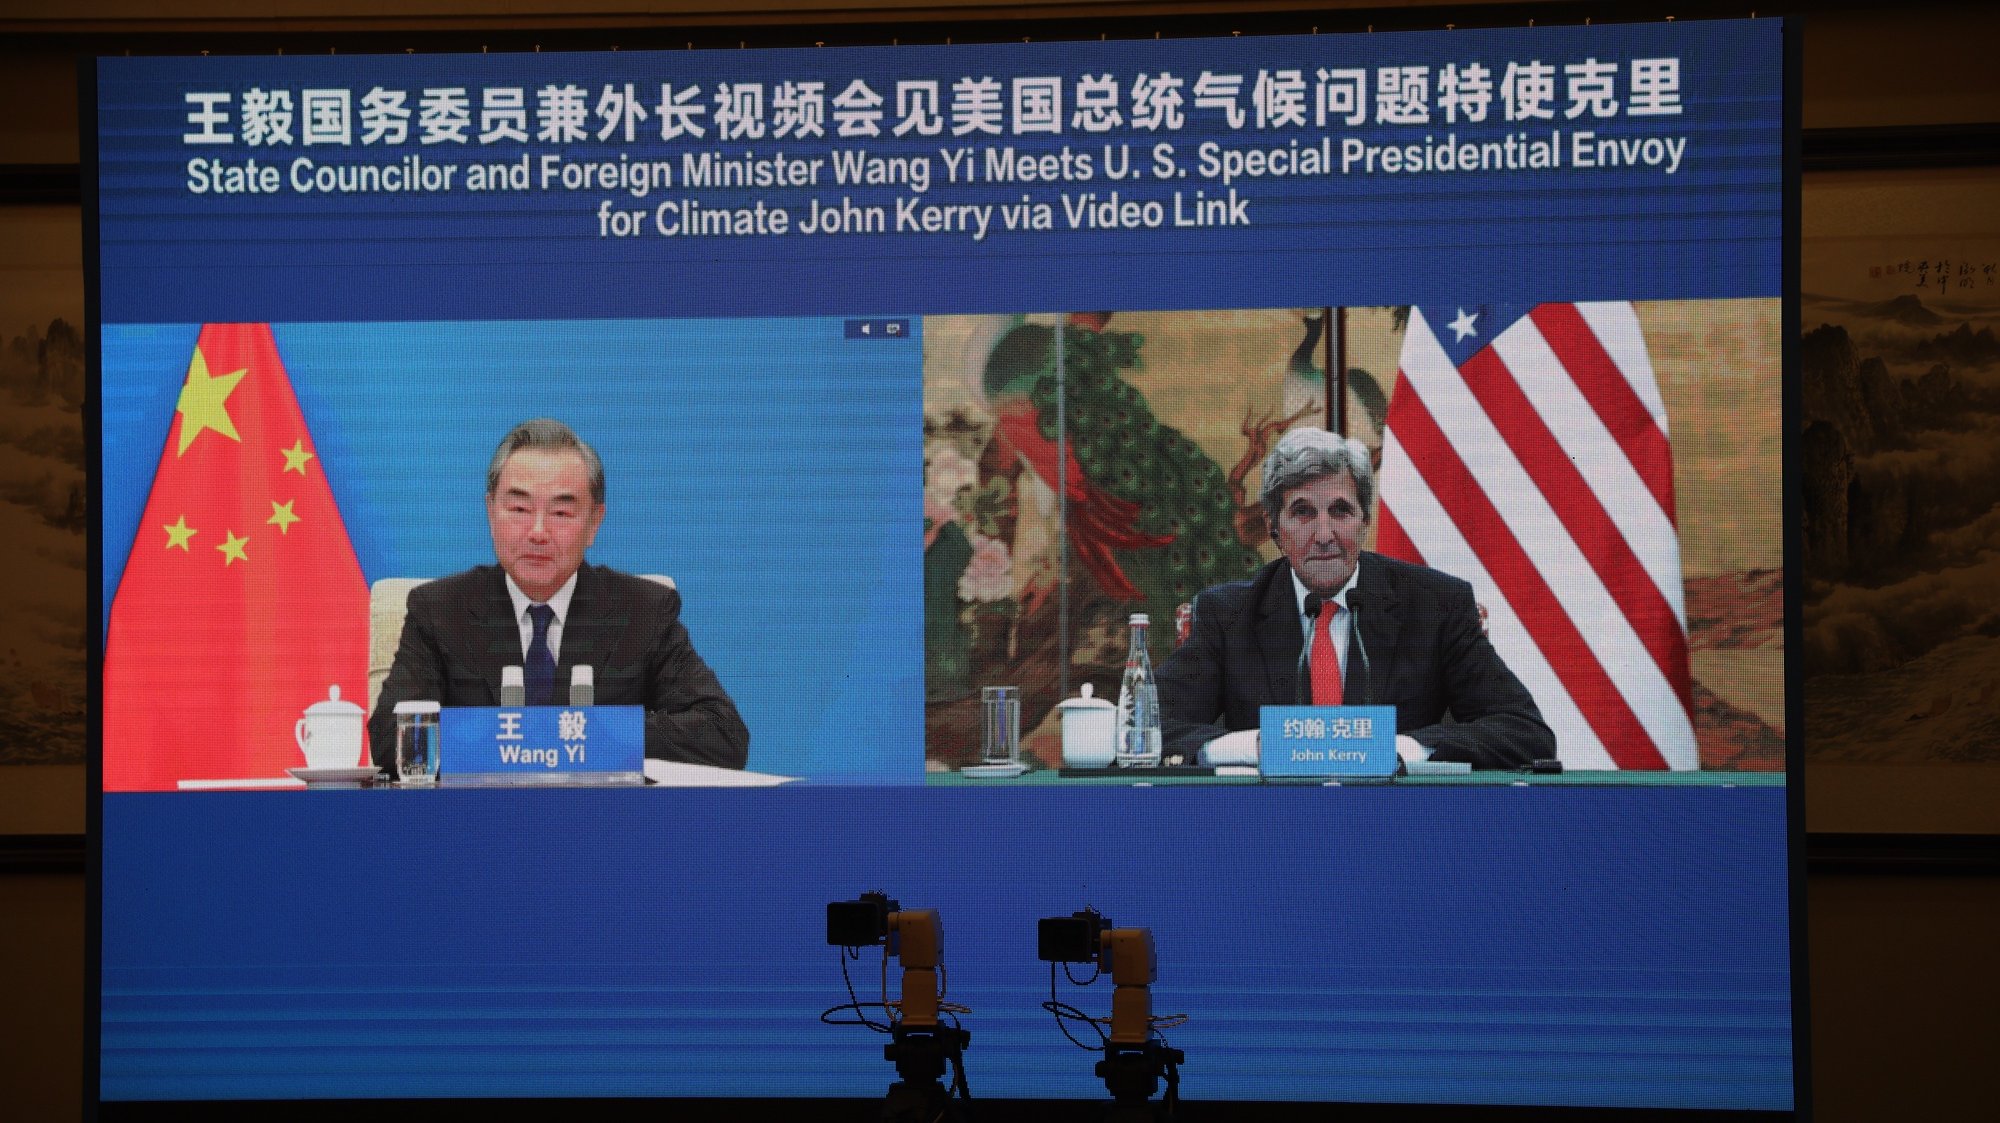 epa09442070 A handout photo made available by the US Department of State shows US Special Presidential Envoy for Climate John Kerry (R) and China&#039;s State Councilor and Foreign Minister Wang Yi are seen on a screen during their meeting via video link as John Kerry visits Tianjin, China, 01 September 2021. Special Presidential Envoy for Climate John Kerry visits China to discuss curbing emissions and fossil fuels among other climate issues.  EPA/US Department of State HANDOUT  HANDOUT EDITORIAL USE ONLY/NO SALES